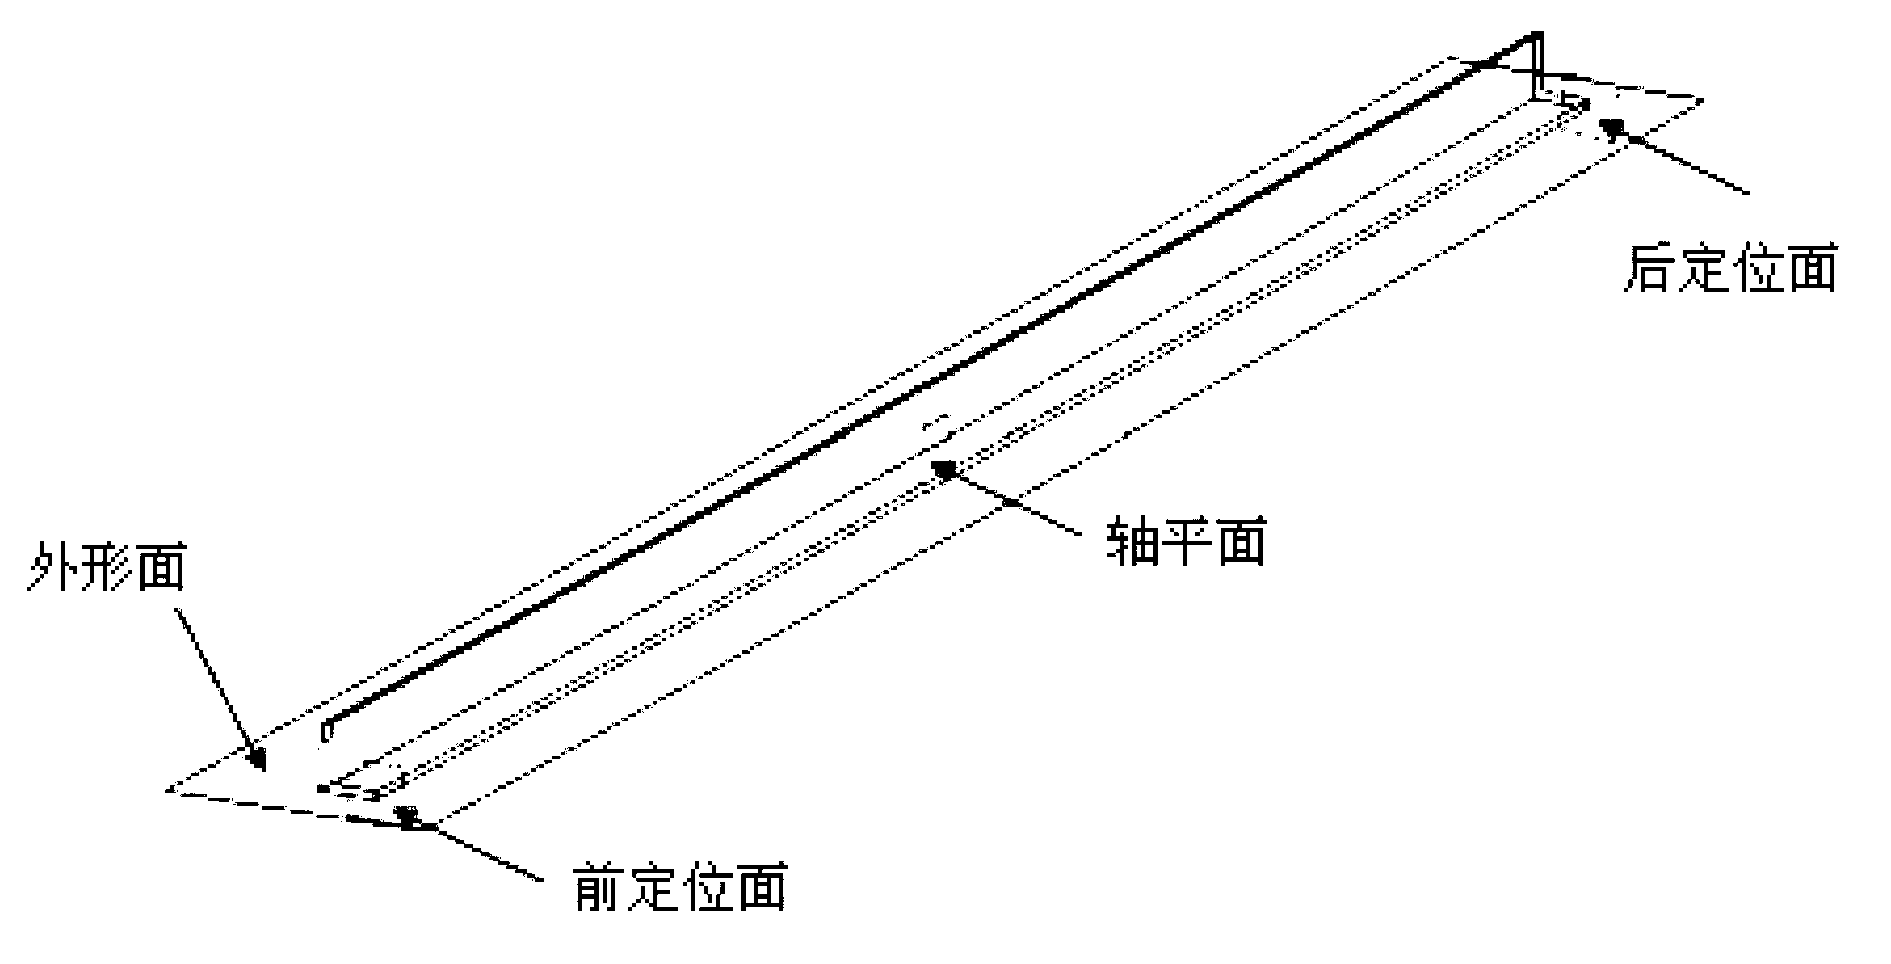 Method for parametrically designing primary components of airplane long truss-type parts